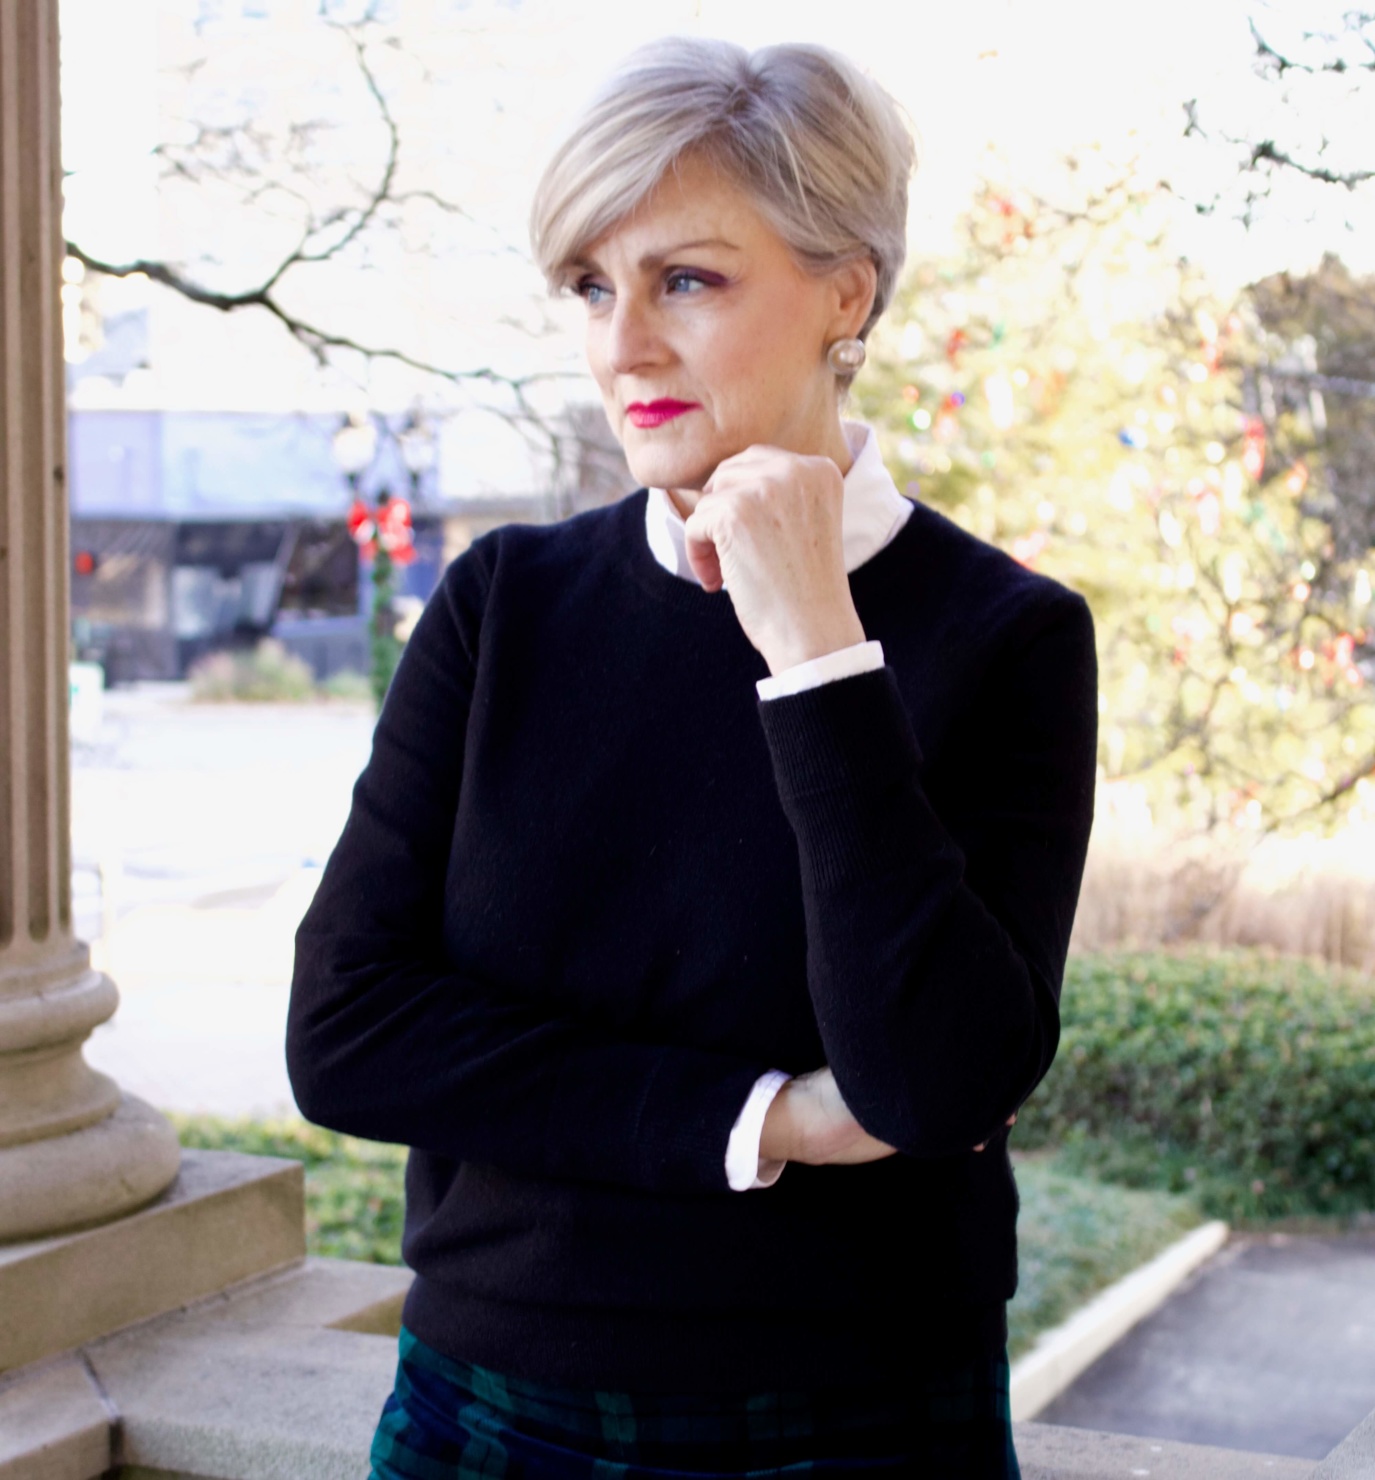 Christmas in the City - beth from Style at a Certain Age wears an Everlane black cashmere crewneck